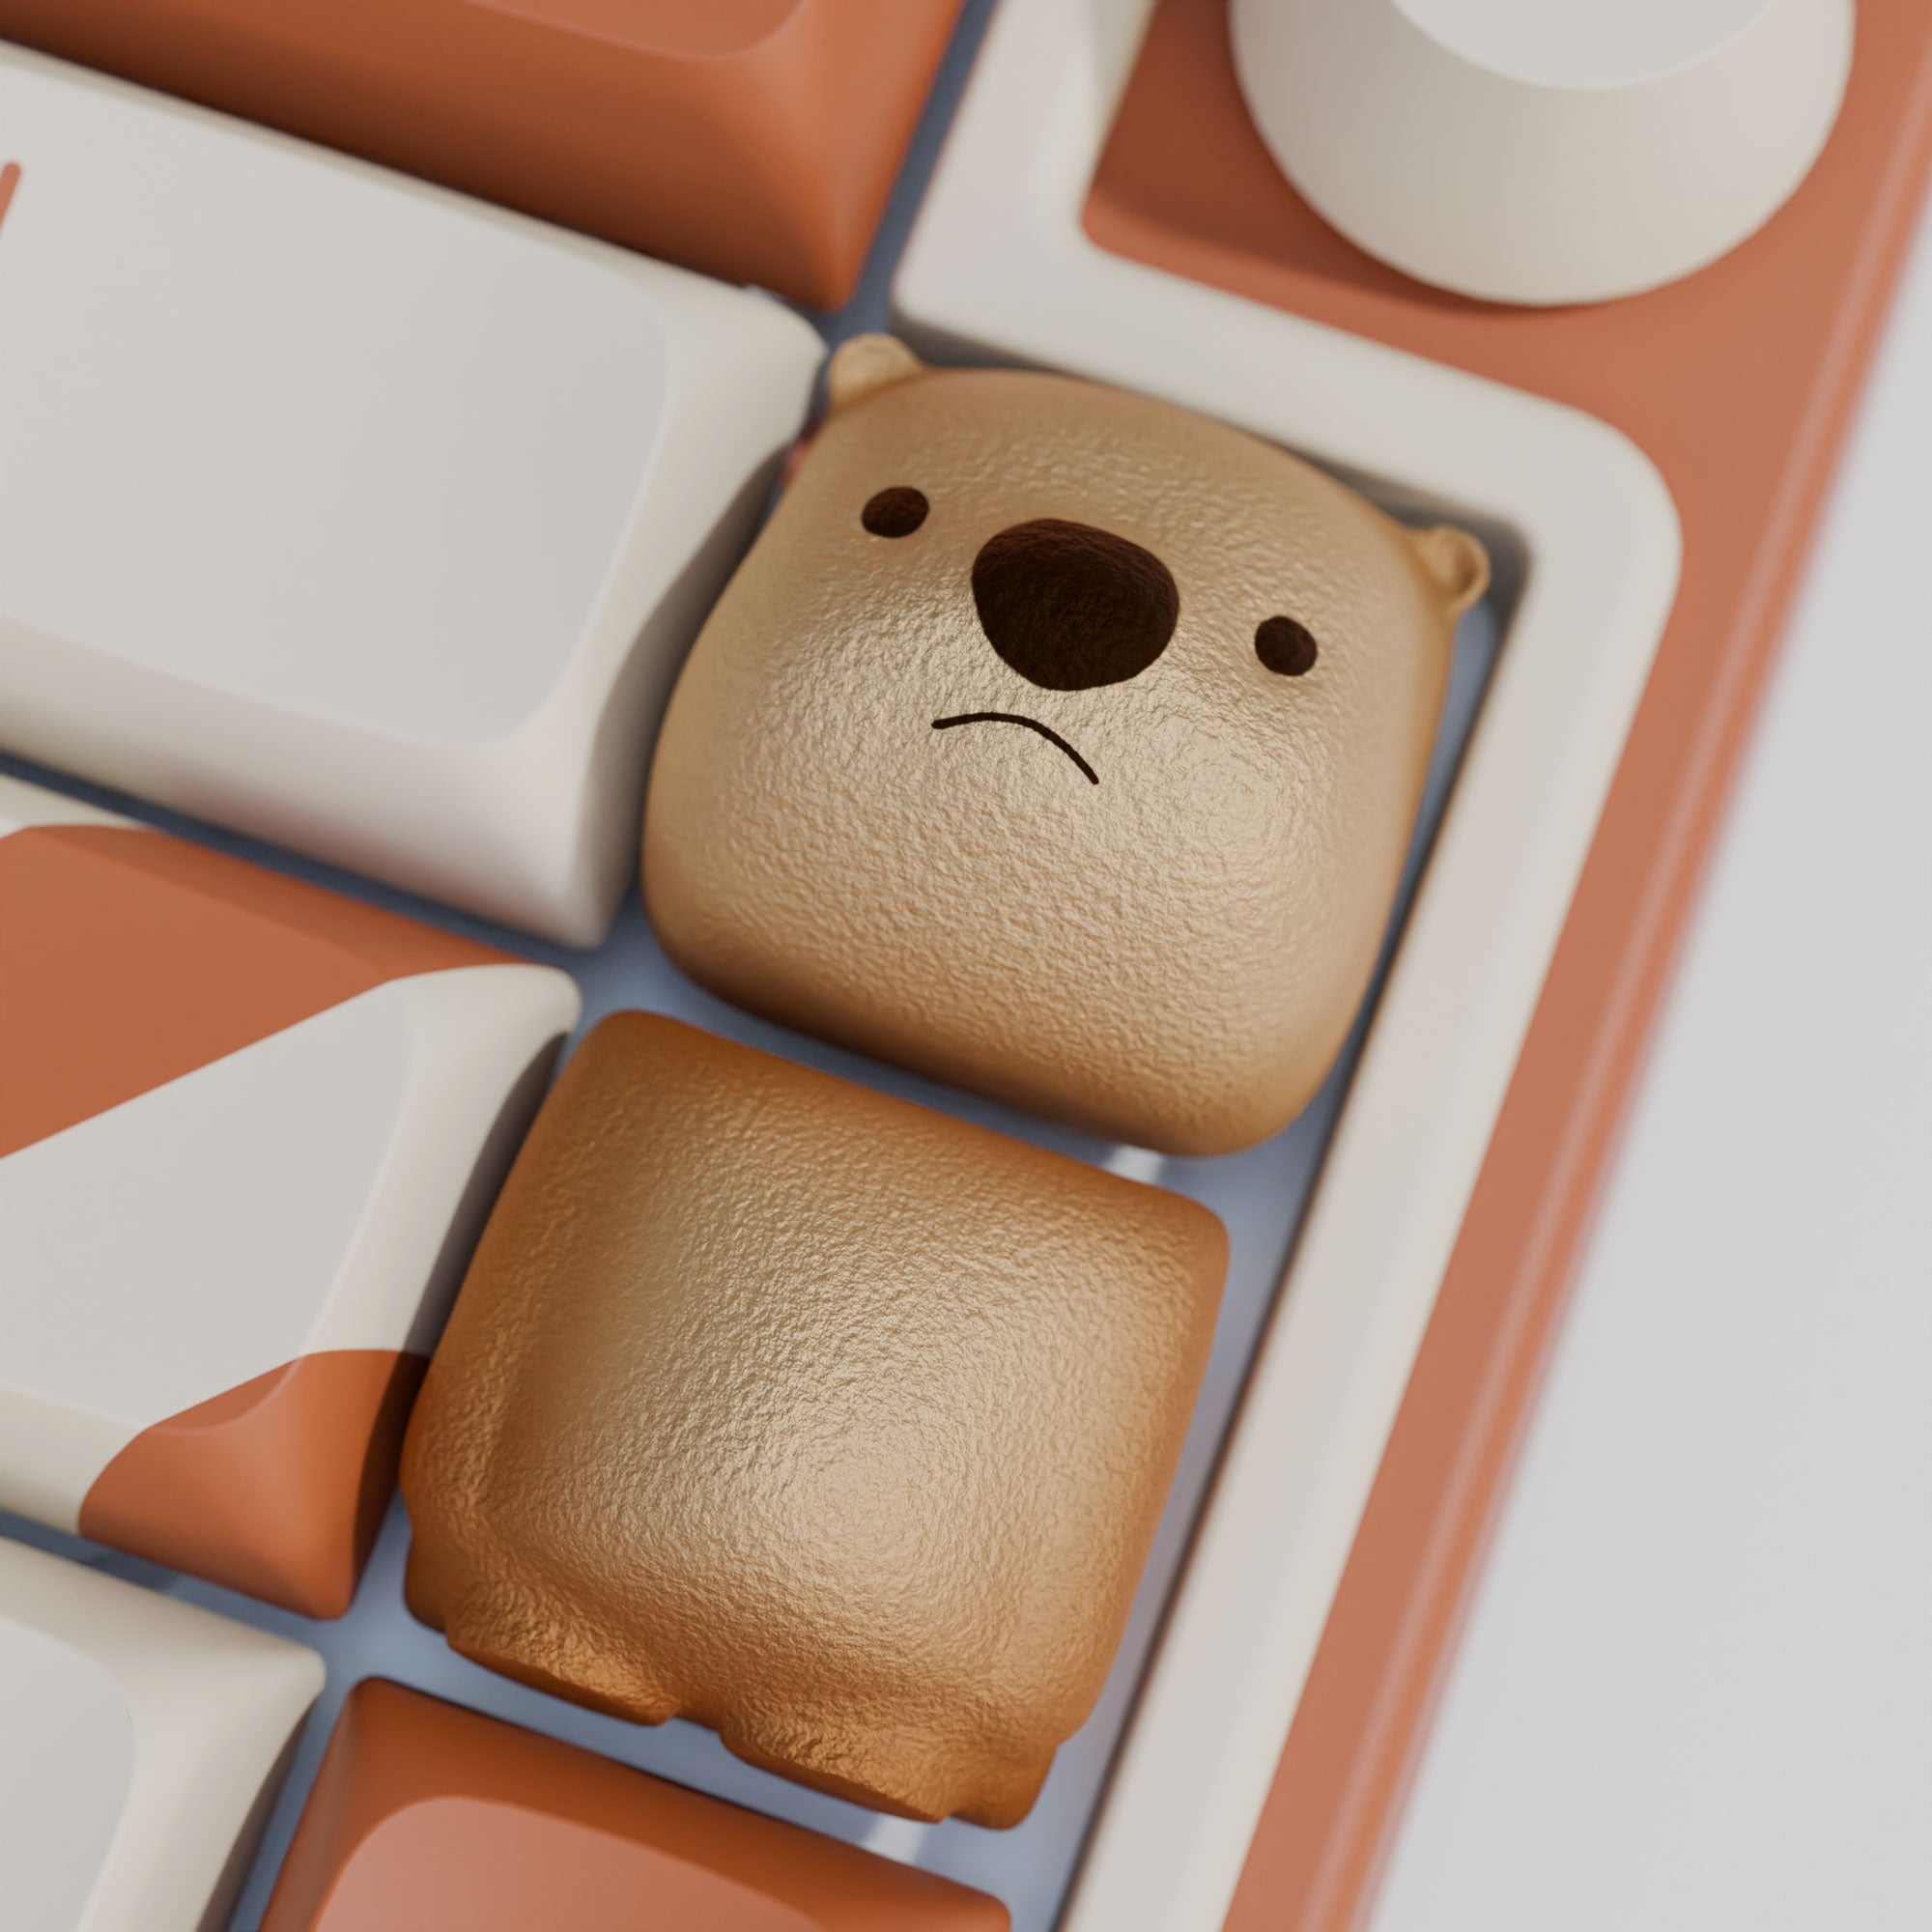 A complete Bear made of two Keycaps